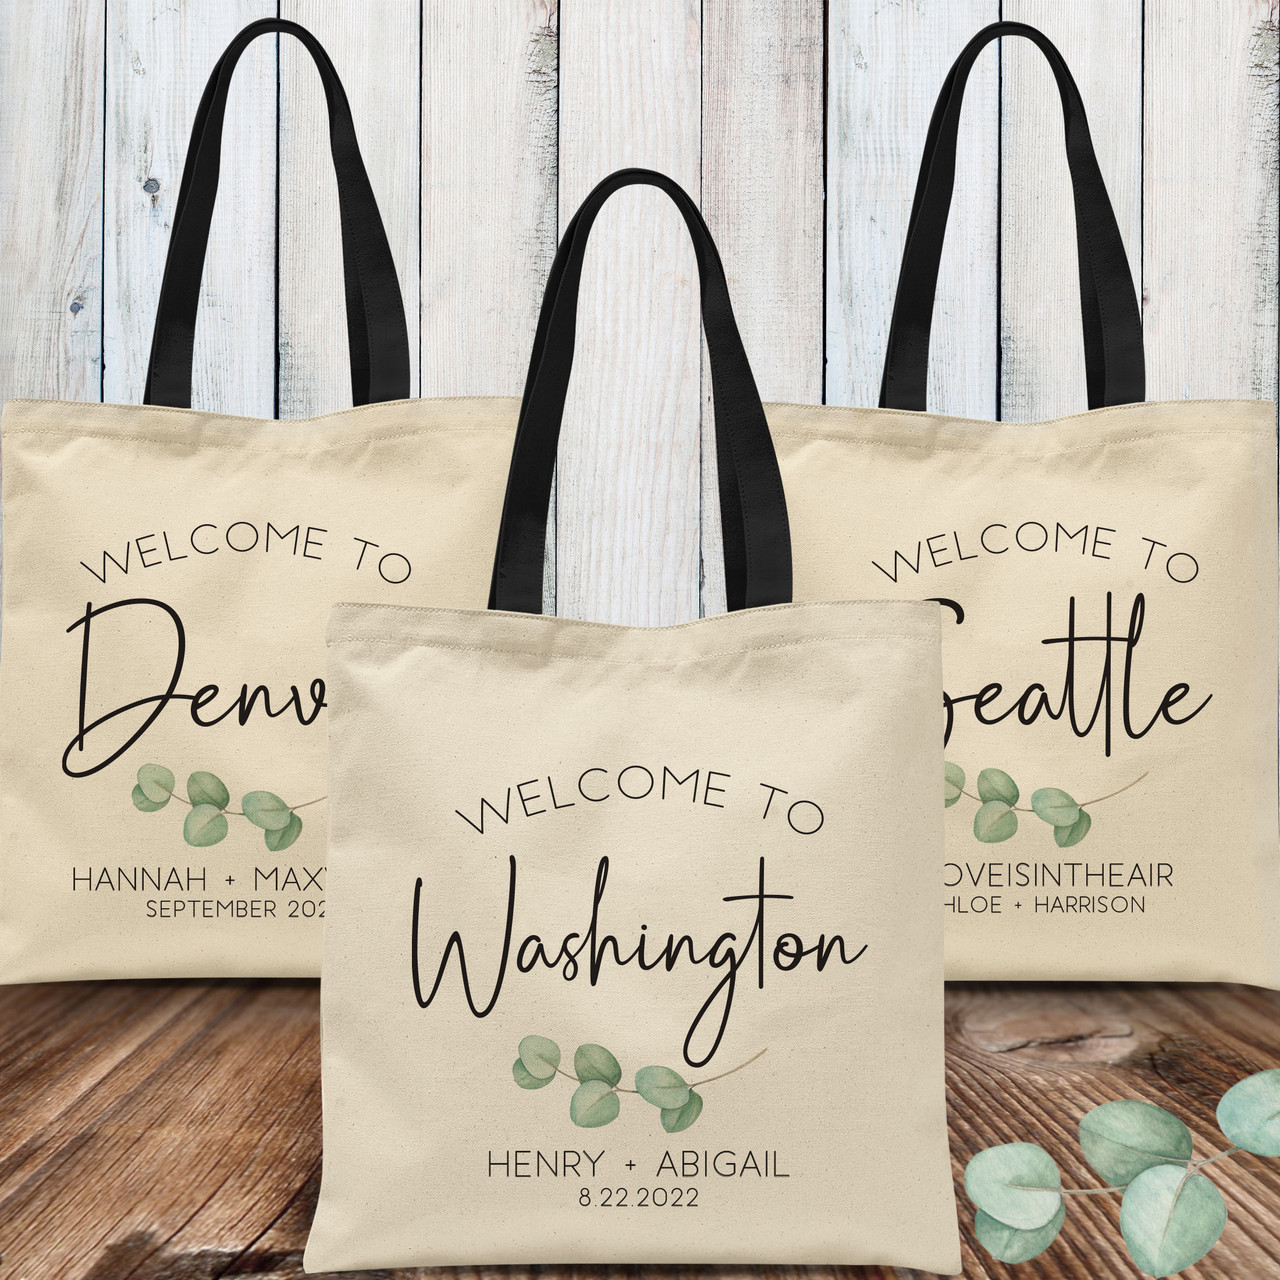 20 Wedding Welcome Bags and Favors Your Guests Will Love  Destination  Wedding Details